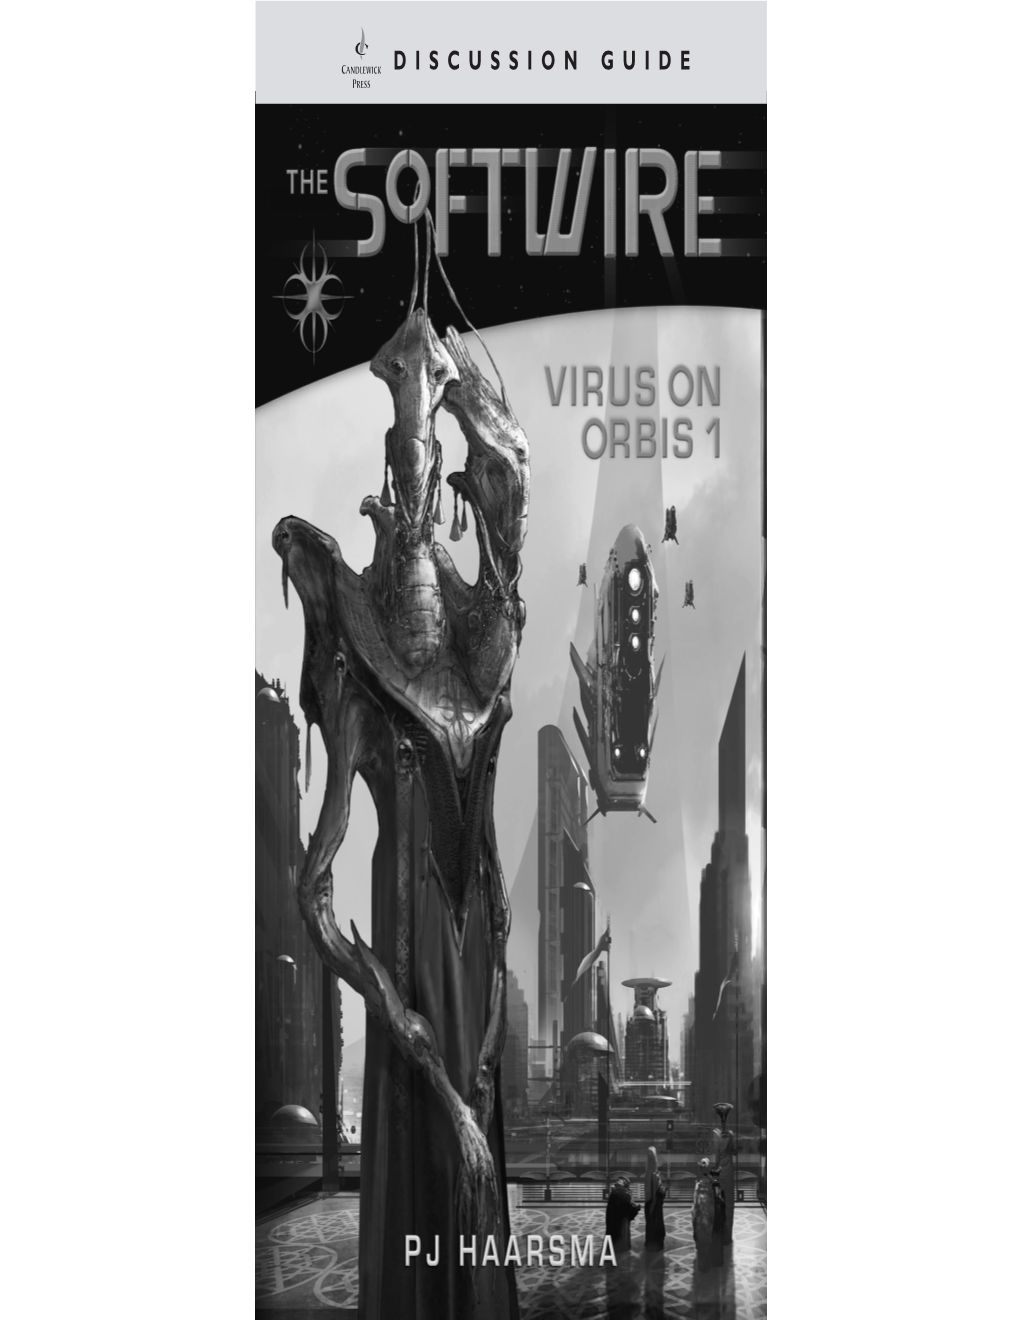 The Softwire Is a Science ﬁction Novel